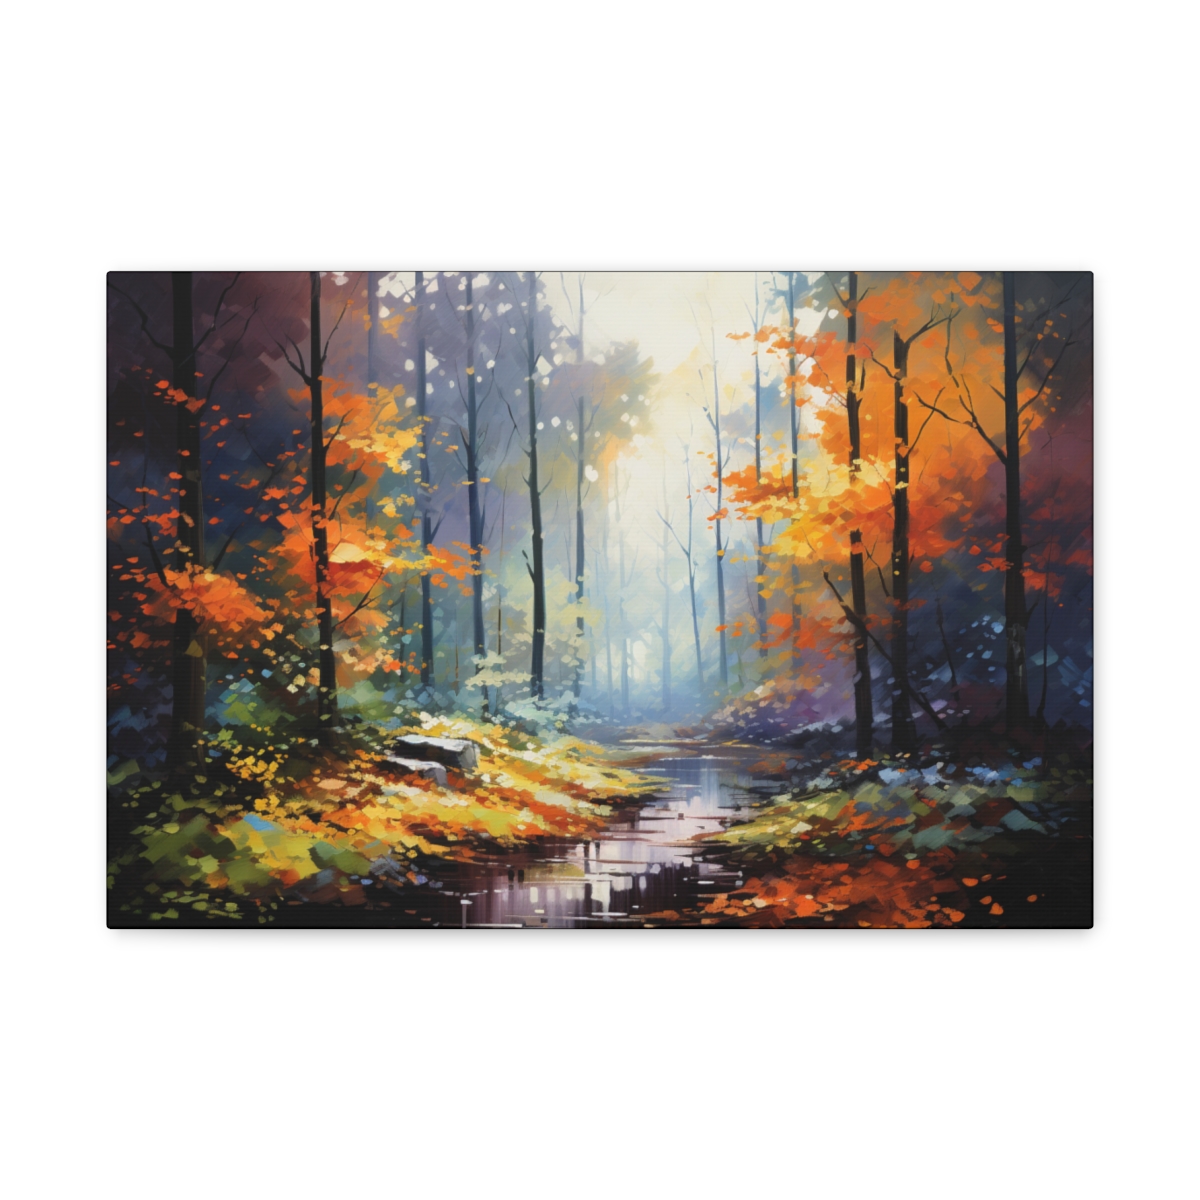 Forest Art Canvas Print: Stardust Whispers